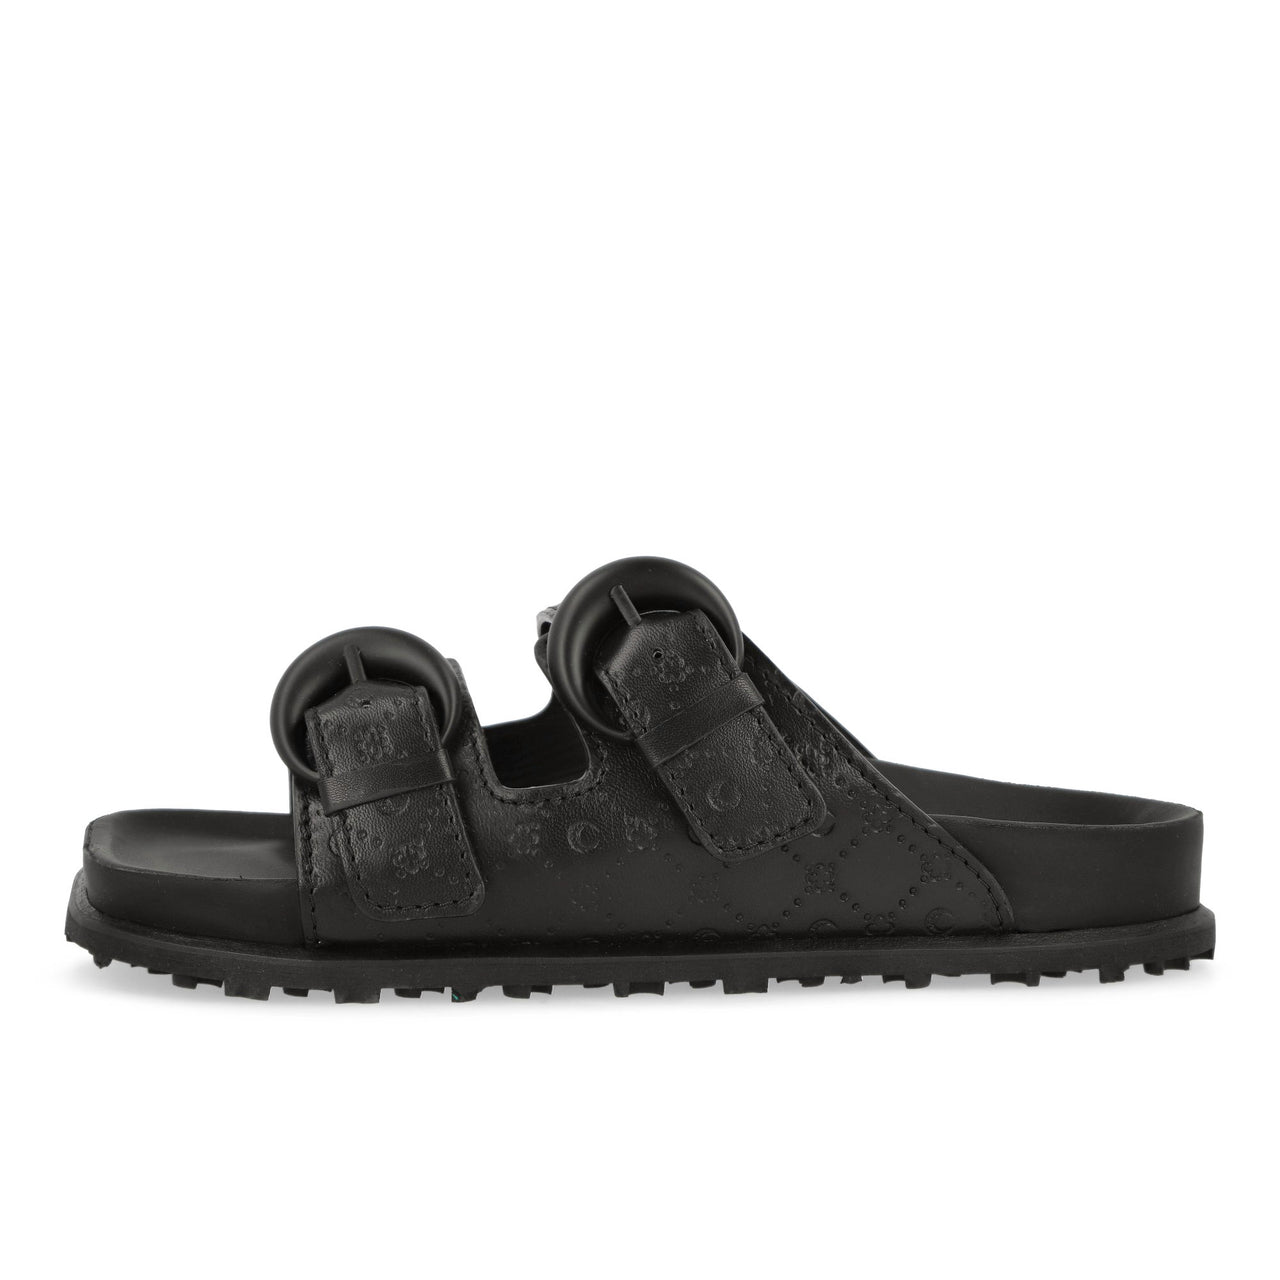 Embossed Leather MS Ground Sandal